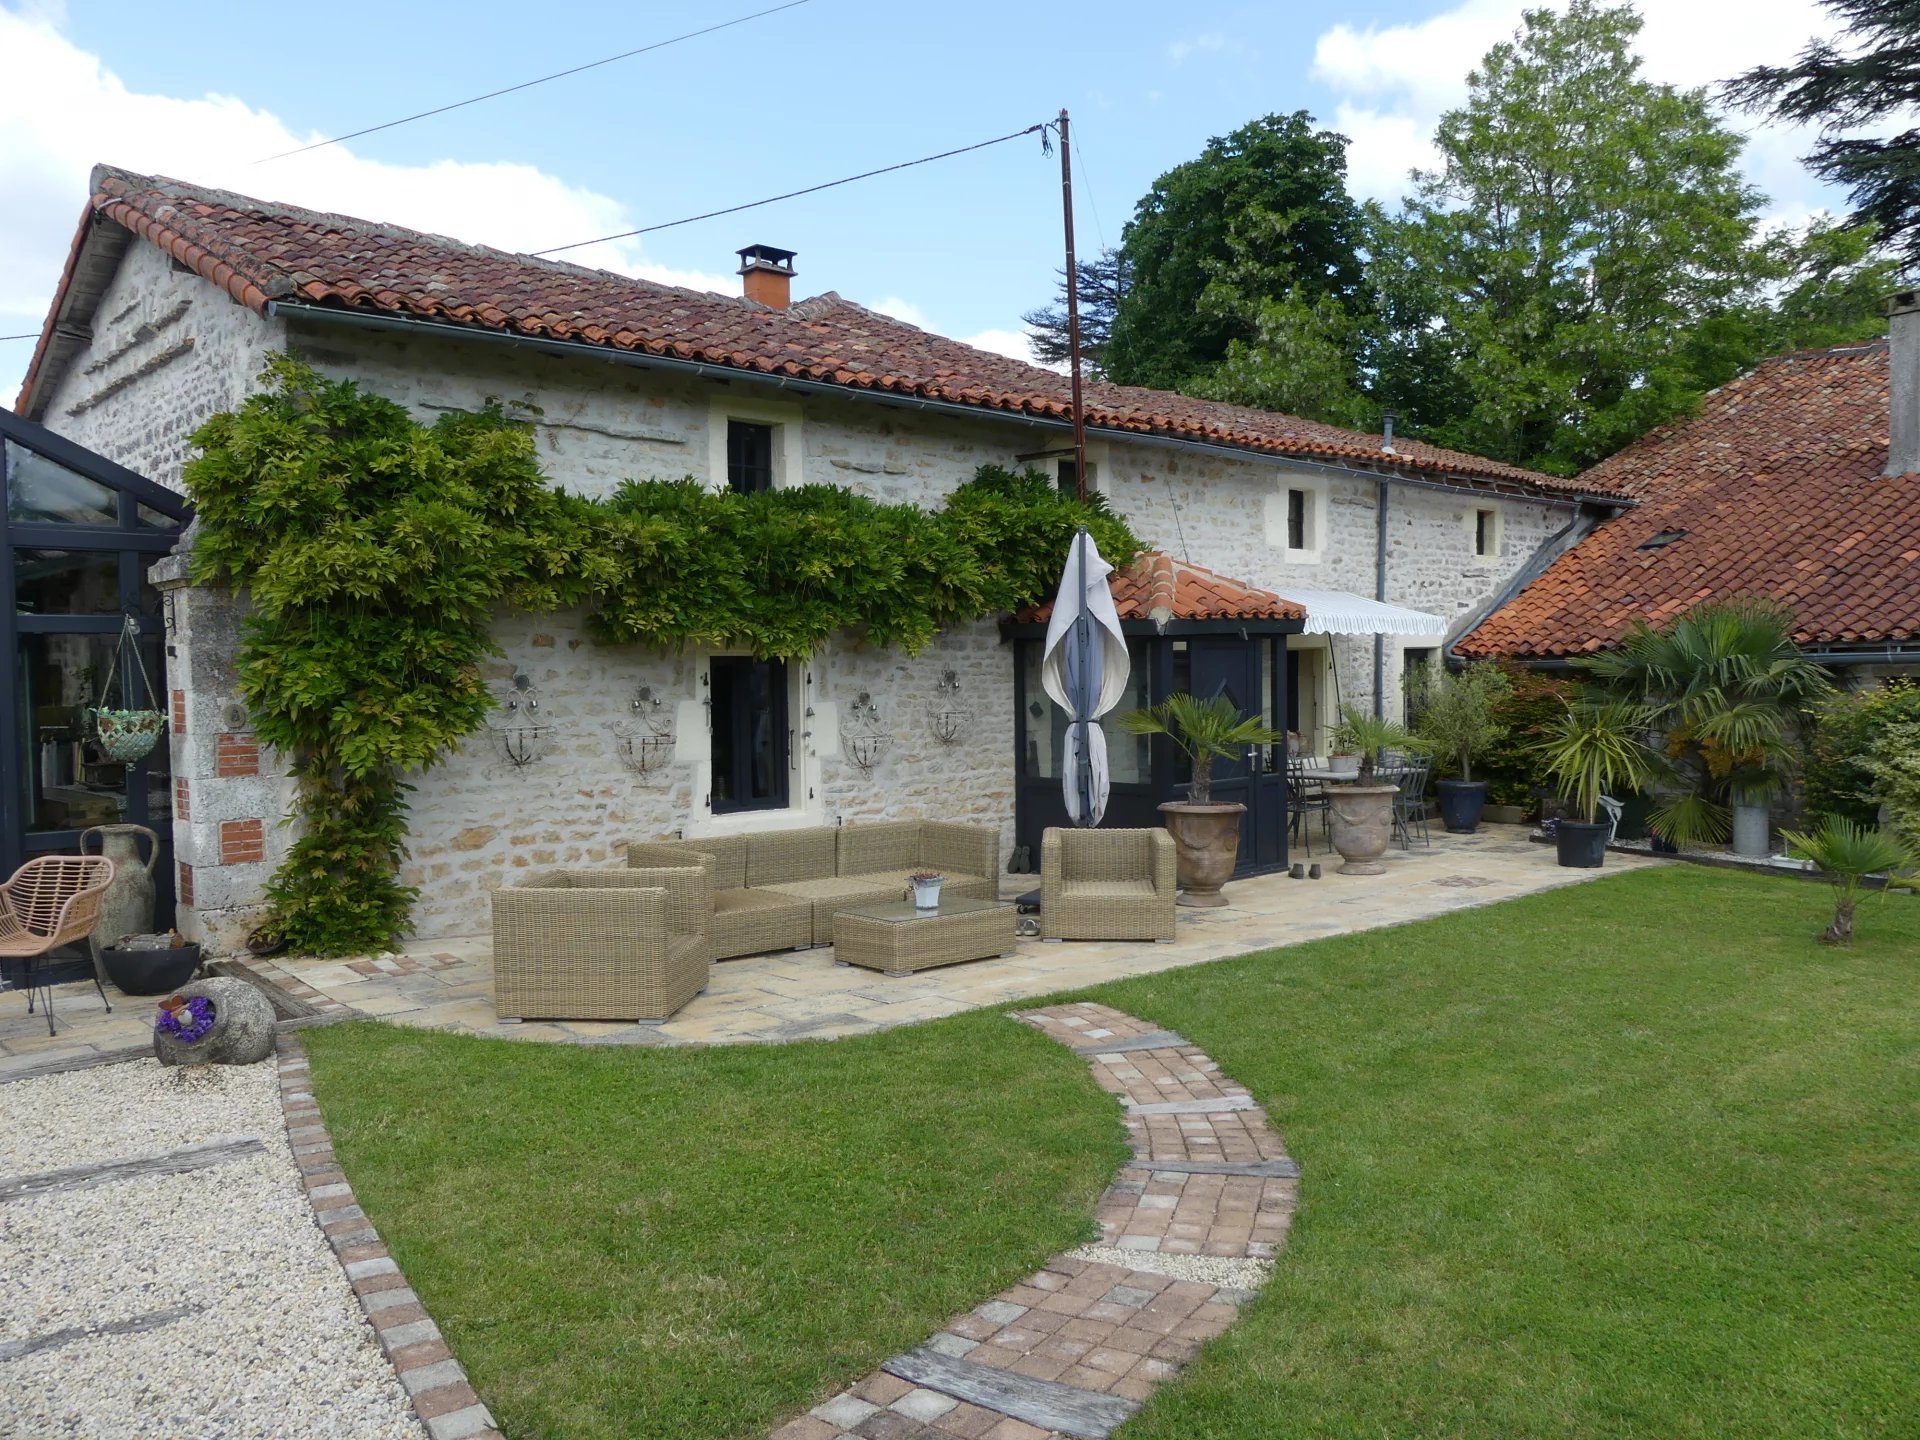 Beautiful house - quality renovation, located in the countryside, with outbuildings, courtyard and garden